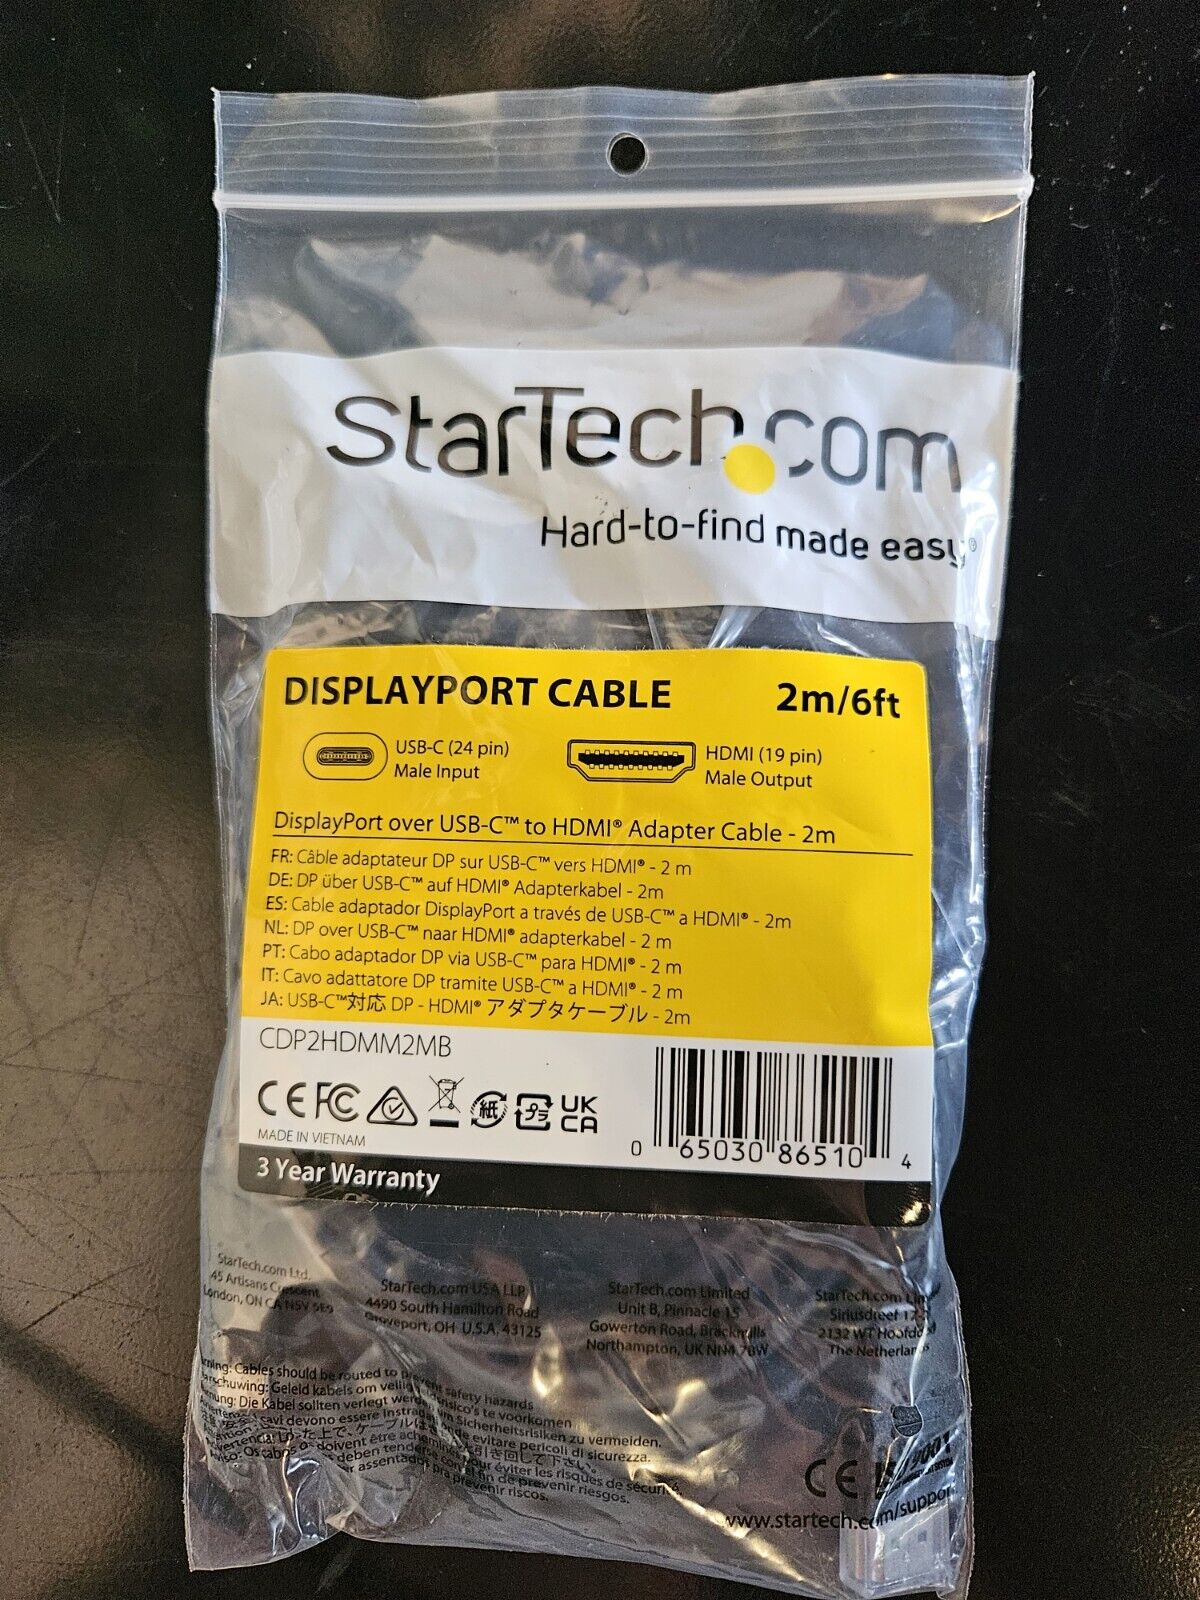 Brand New StarTech.com USB-C to DisplayPort Cable 1.8m/6ft - Fast Shipping